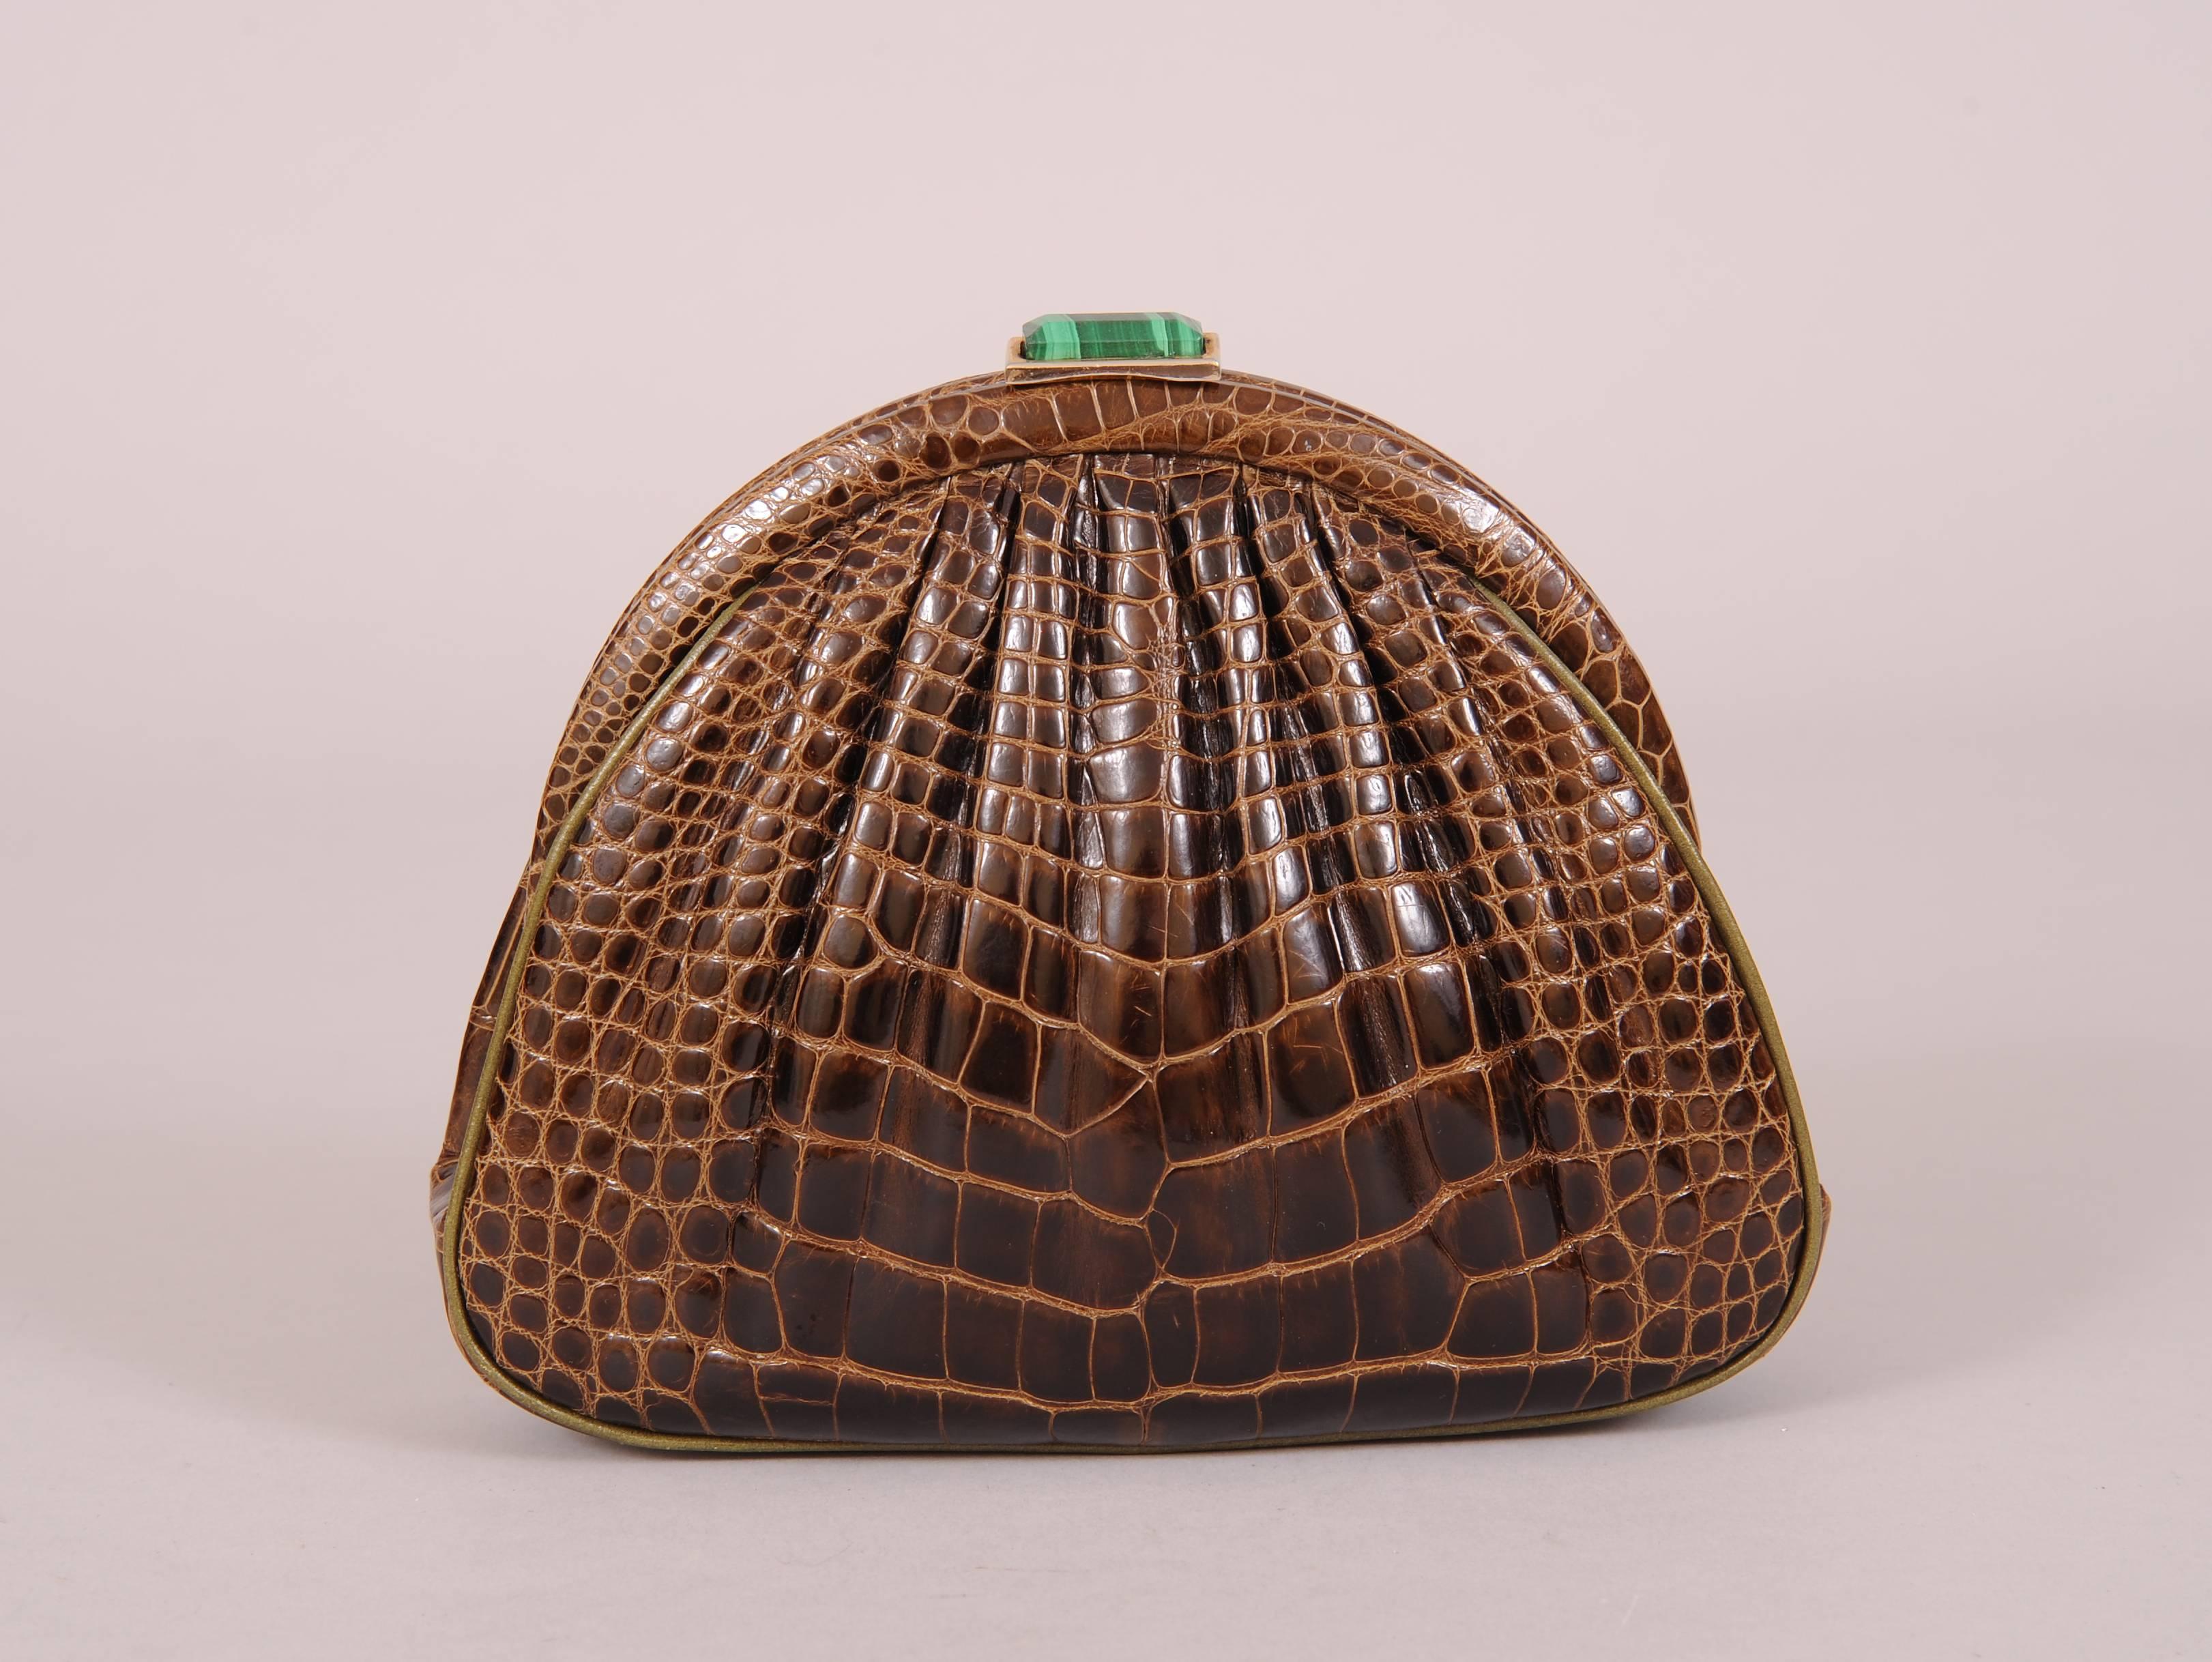 The partnership of Susan Bennis and Warren Edwards designed some of the most sought after and highly coveted hand made shoes and bags of the late 20th century. This rich brown alligator bag is accented with a malachite clasp and olive green leather